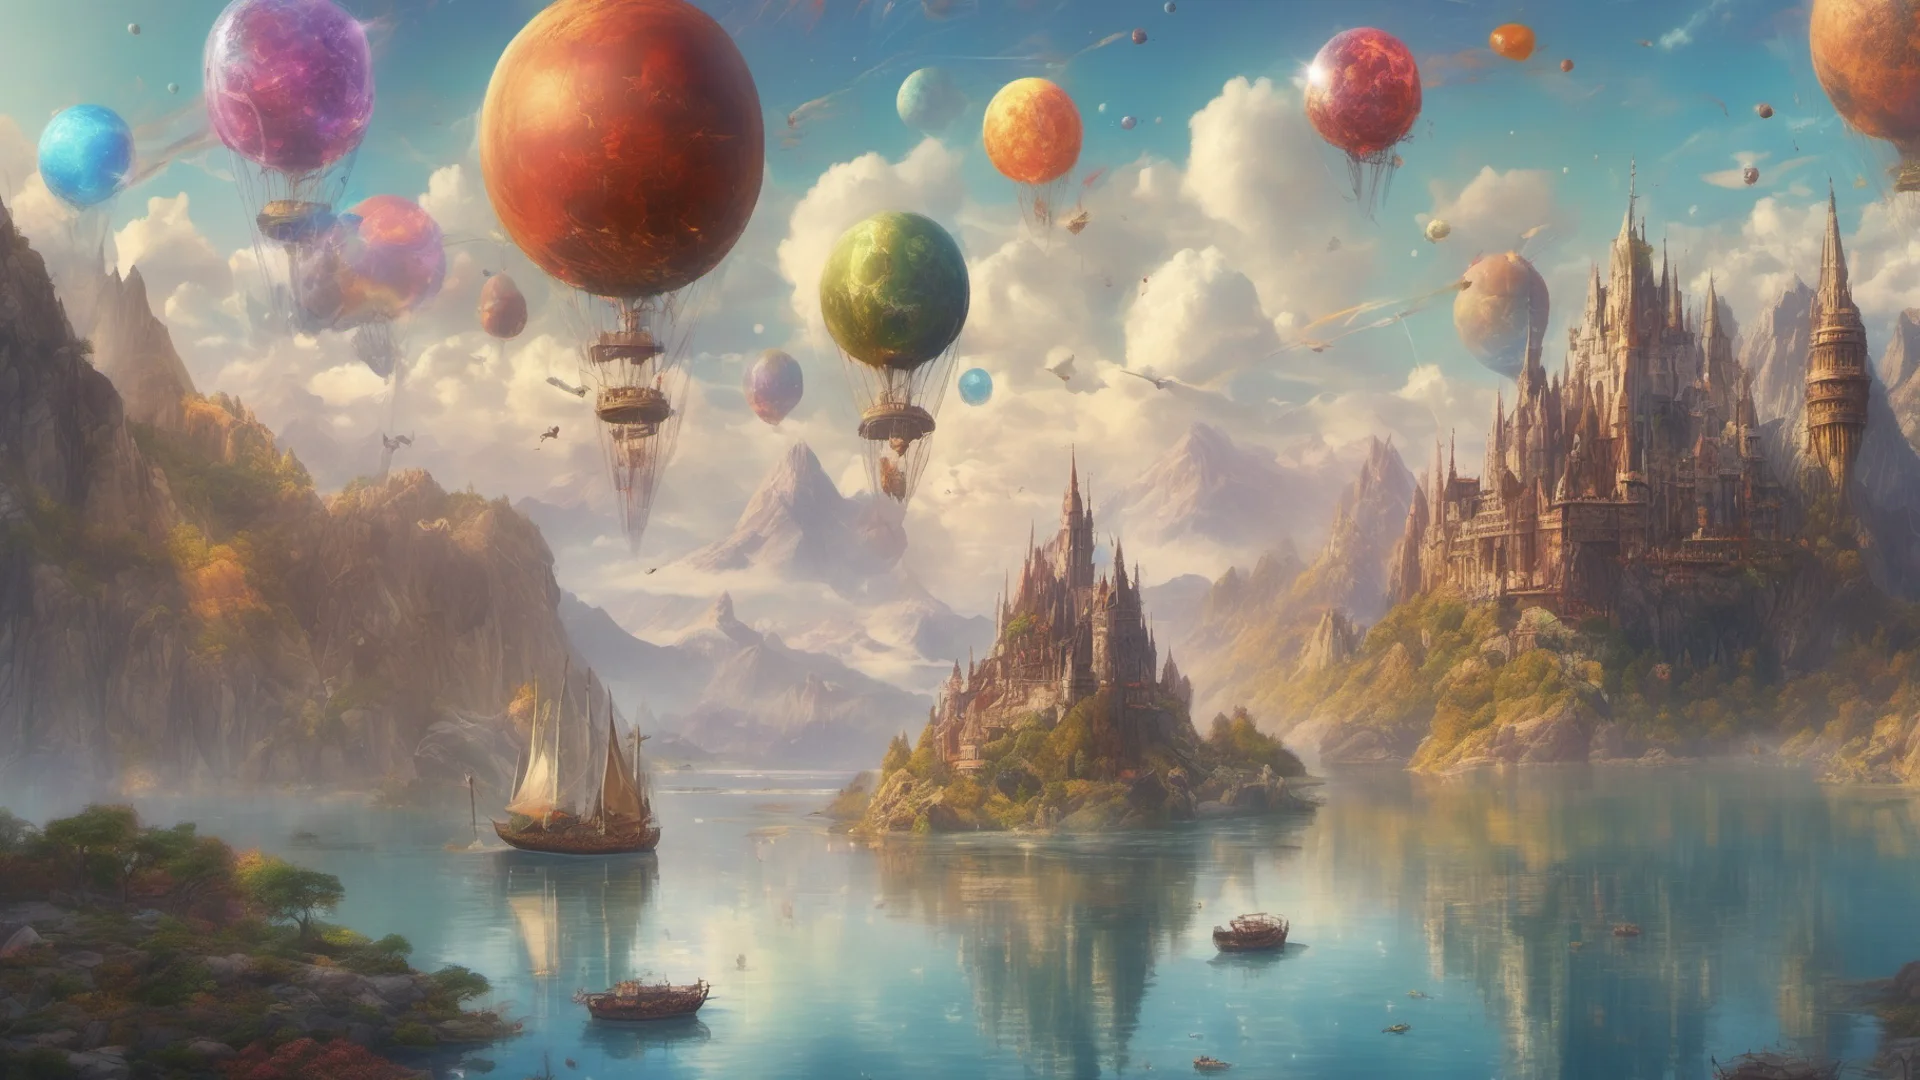 epic fantasy environment castle on tall mountain lakes sky with many colorful planets boats sailing airships and blimps floating   confident engaging wow artstation art 3 wide